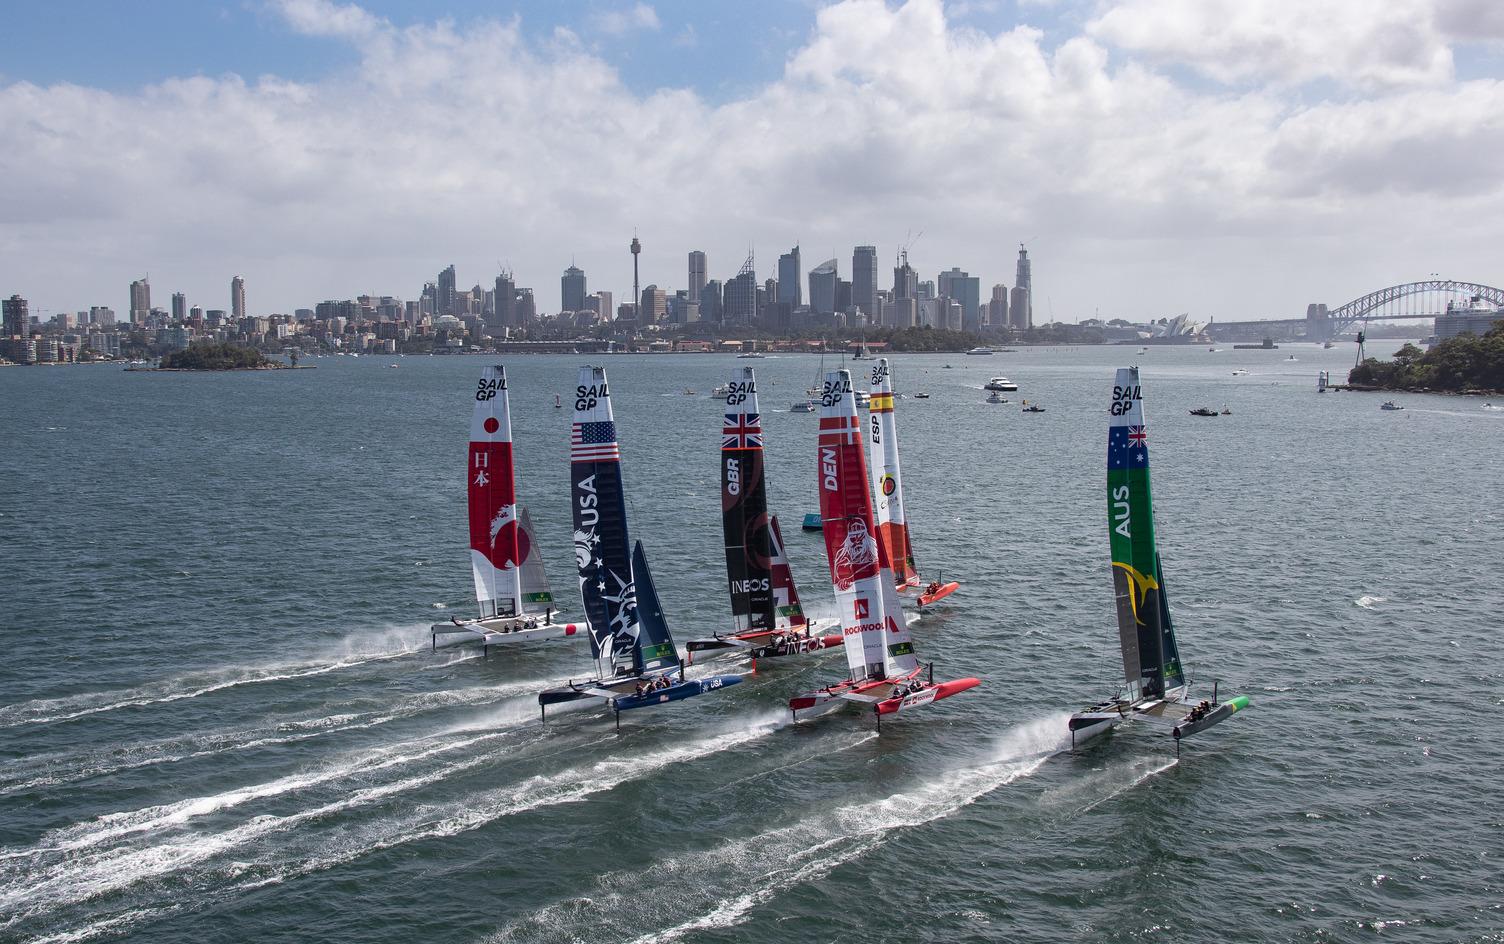 According to wing trimmer Kyle Langford, the conventional soft headsails flown by the hi-tech SailGP F50s are not an anachronism